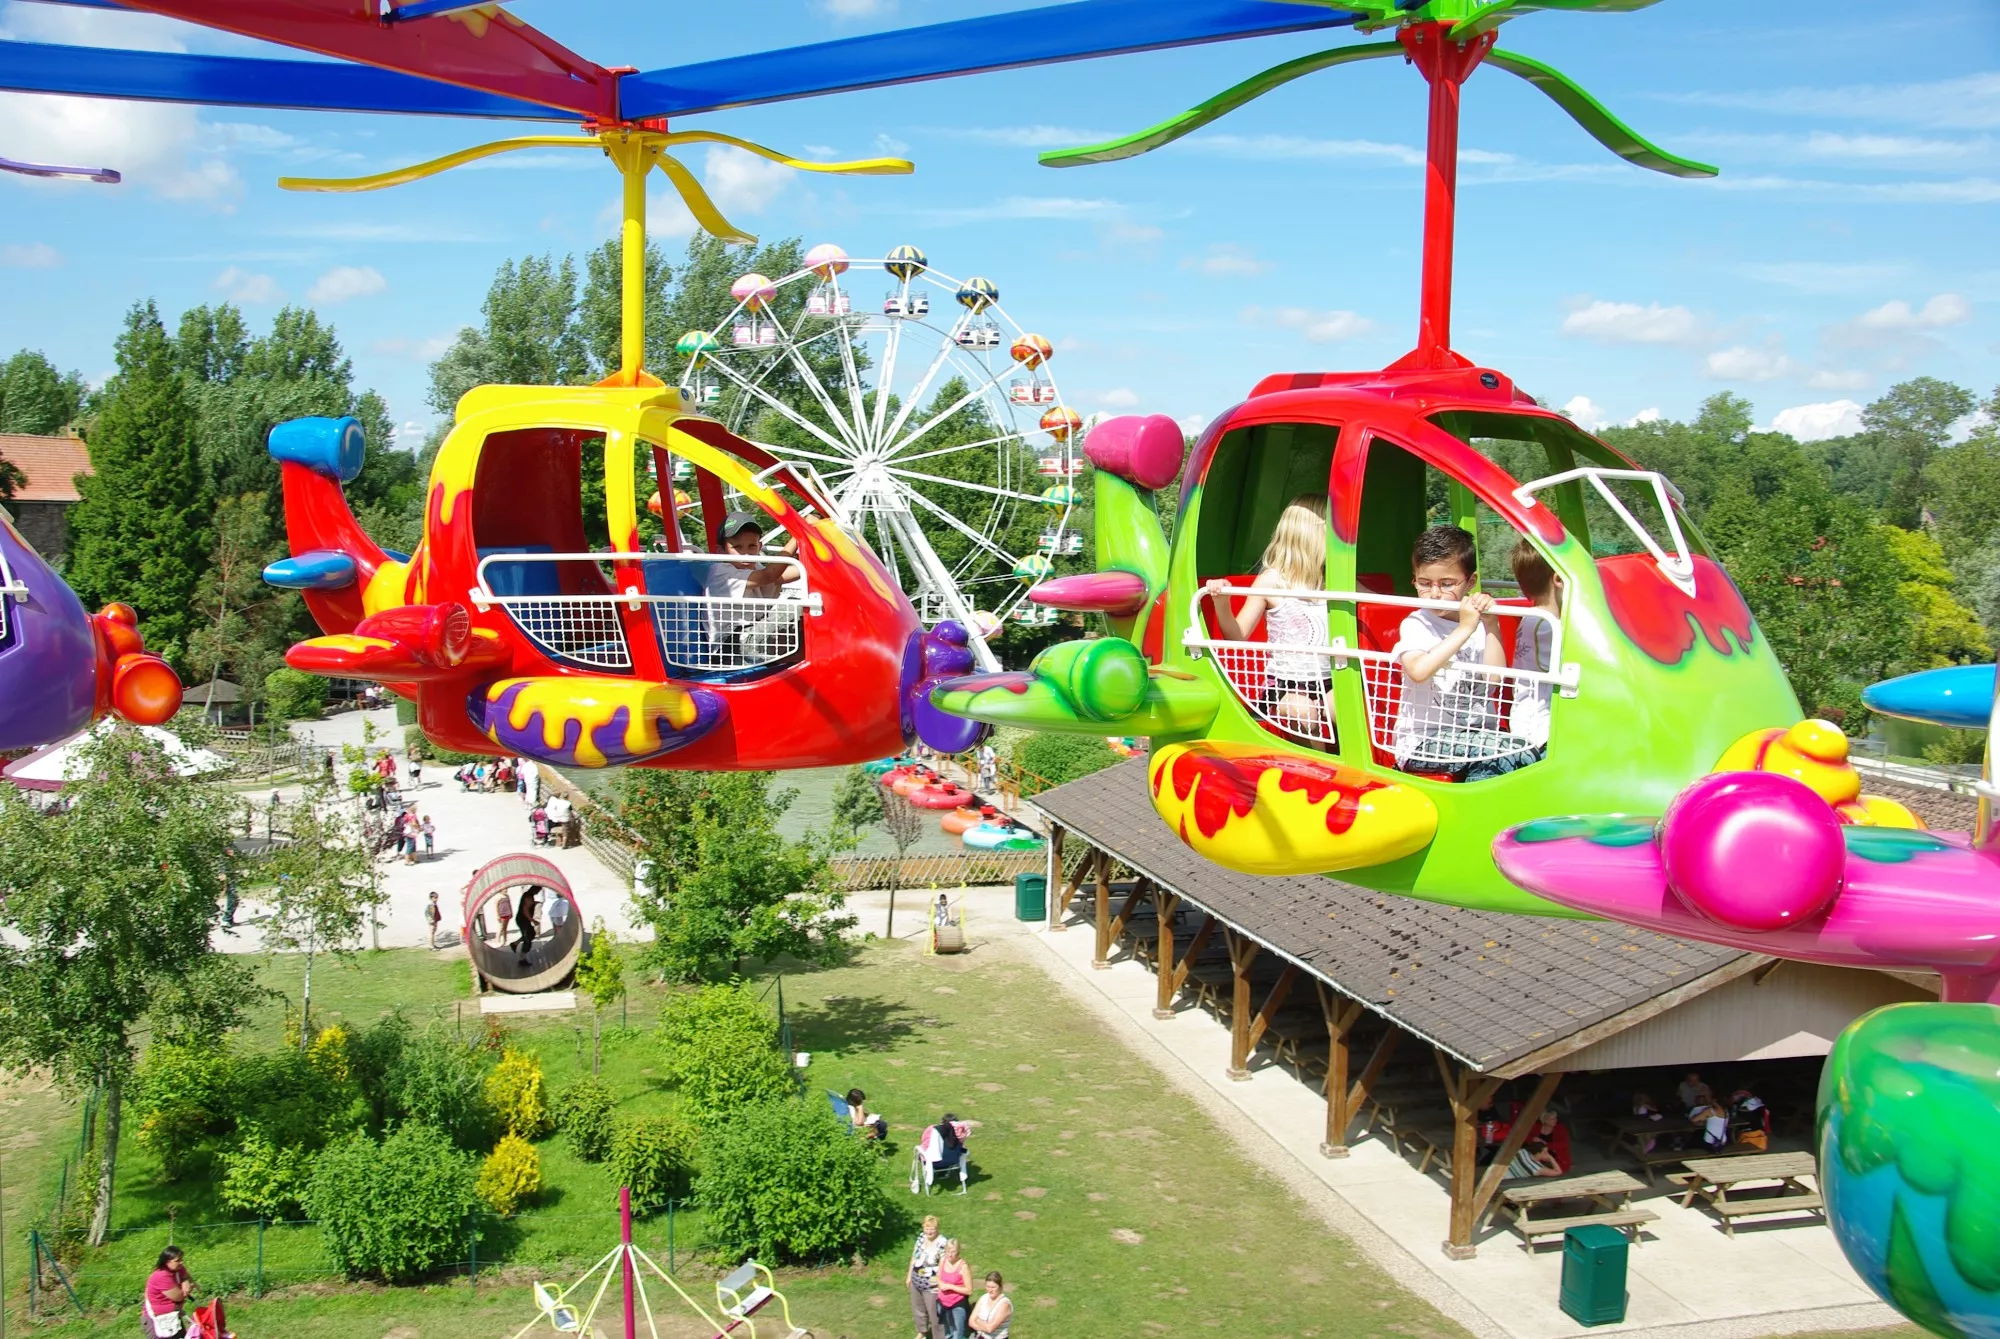 Dennlys Park in France, Europe | Amusement Parks & Rides - Rated 3.7